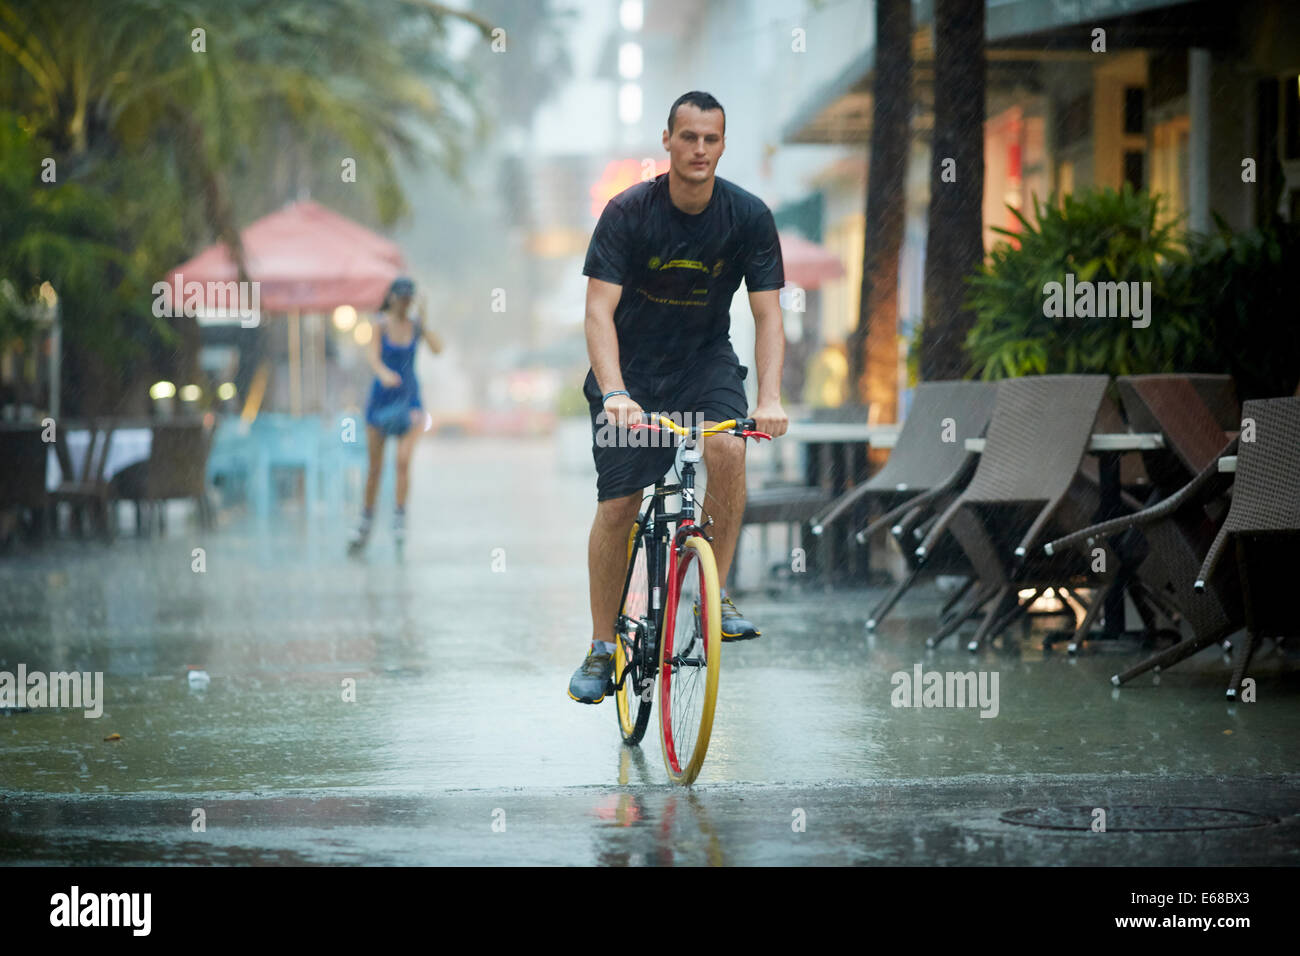 A man cycles through the street on his colorful bike Stock Photo